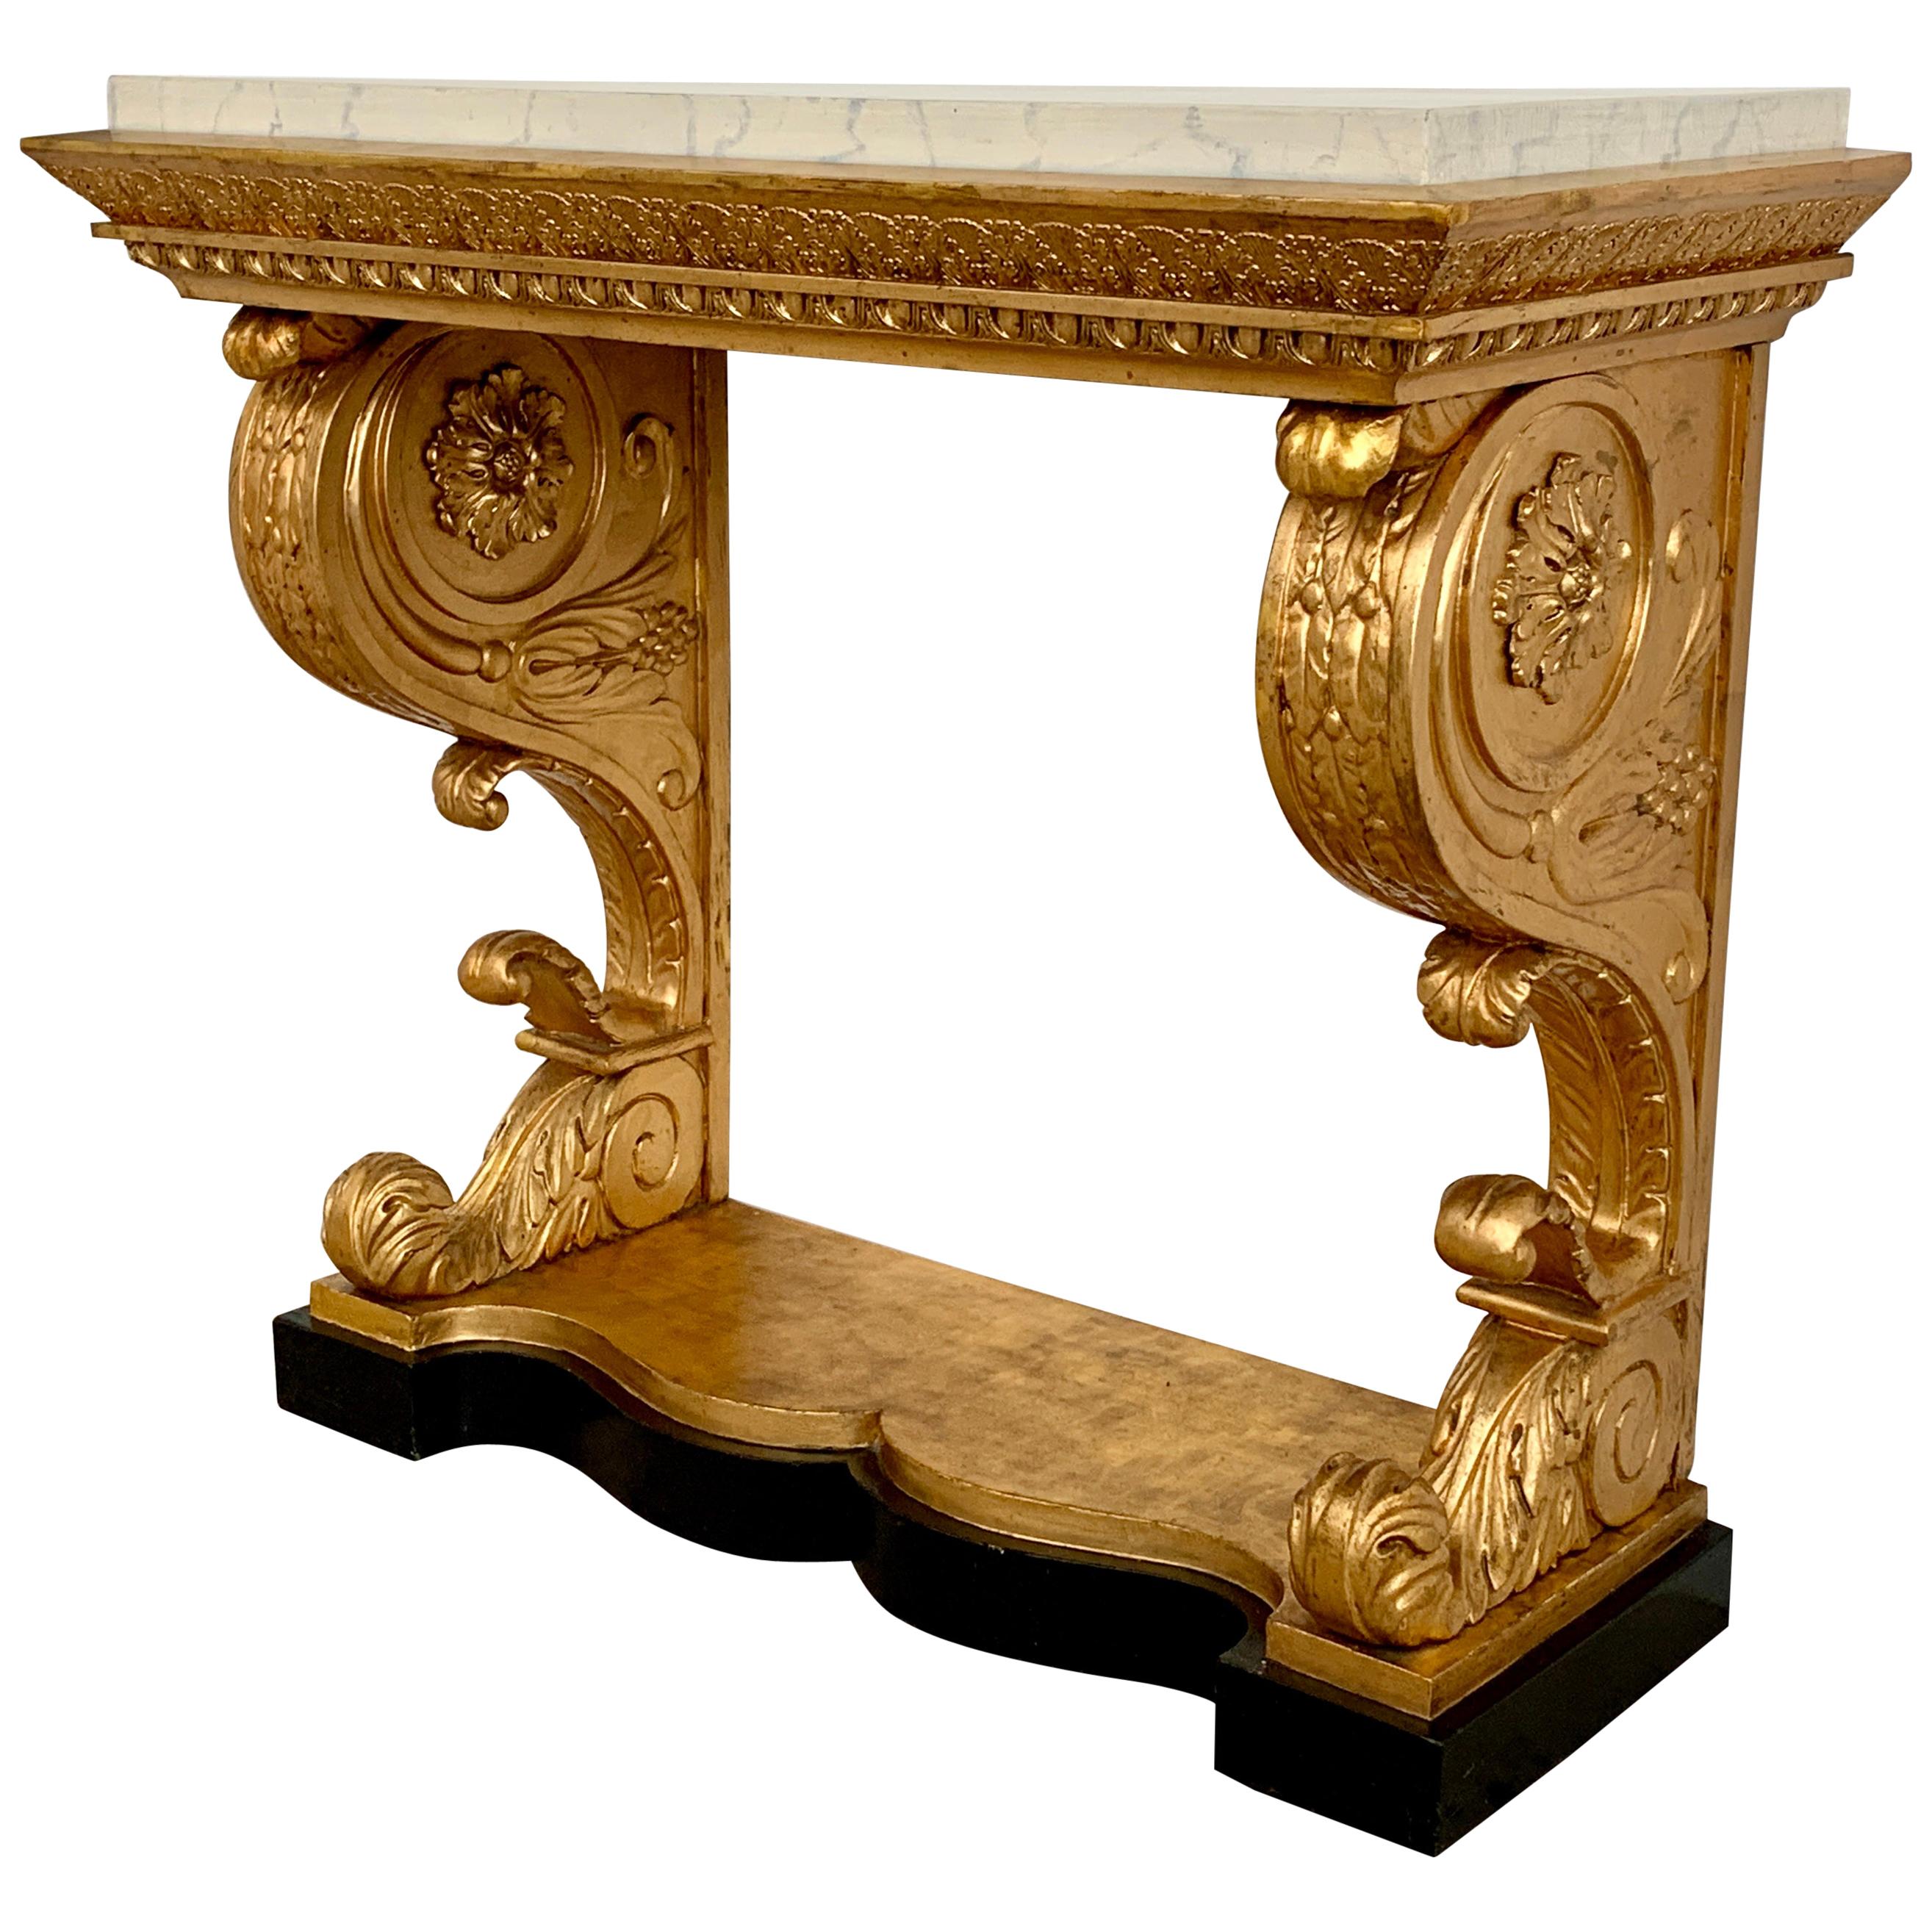 Swedish Giltwood Early 19th Century Empire Console Table